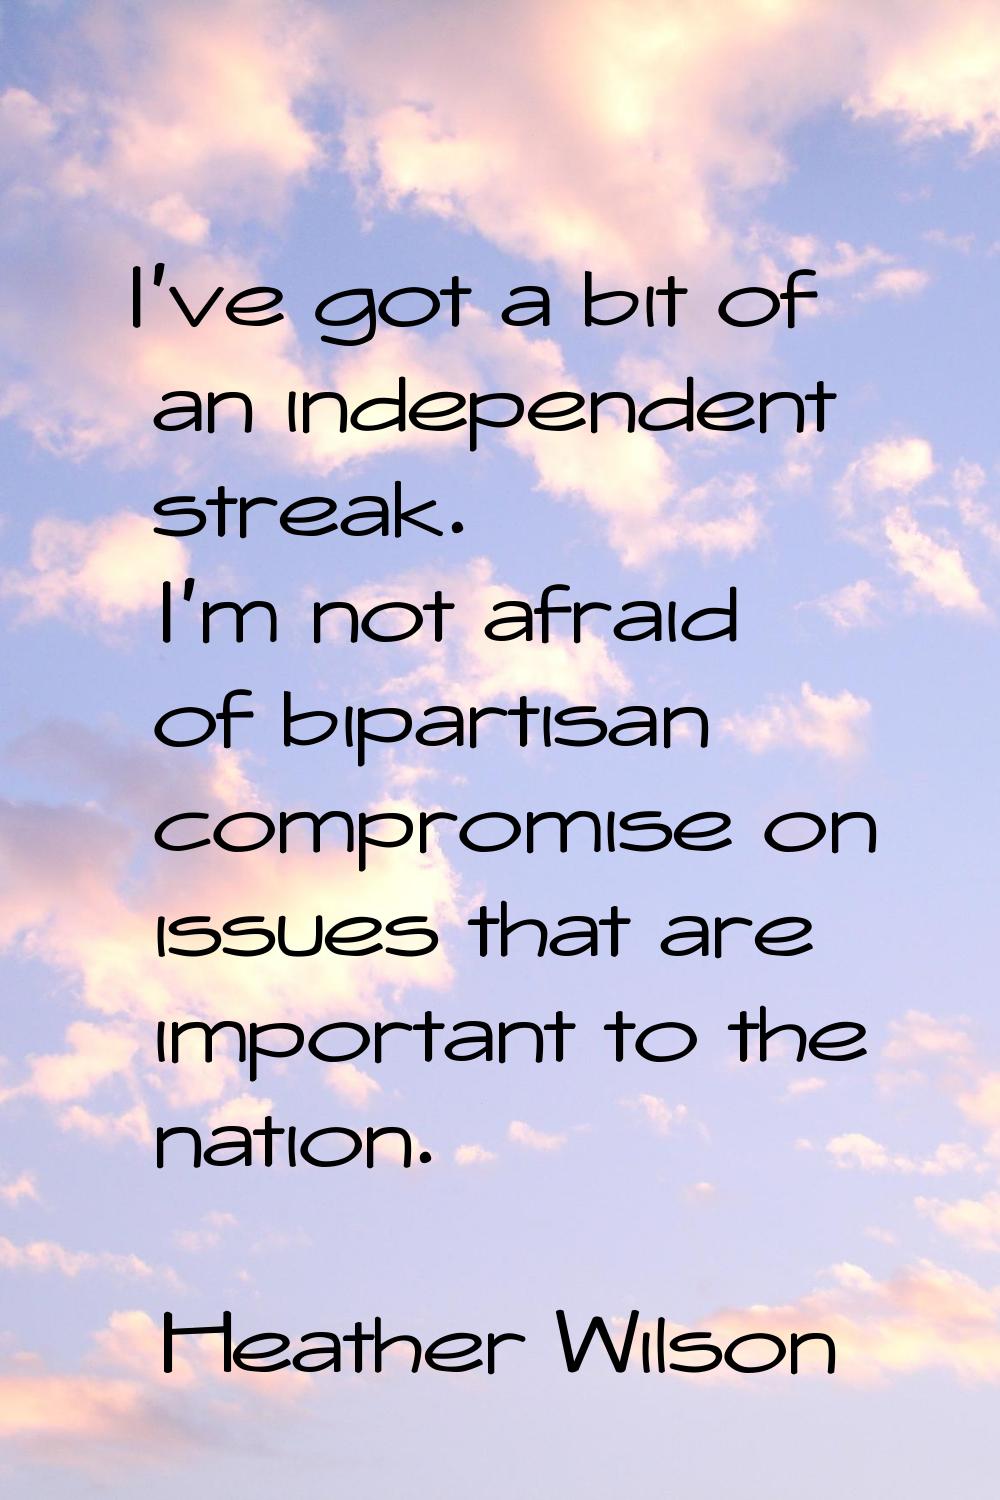 I've got a bit of an independent streak. I'm not afraid of bipartisan compromise on issues that are